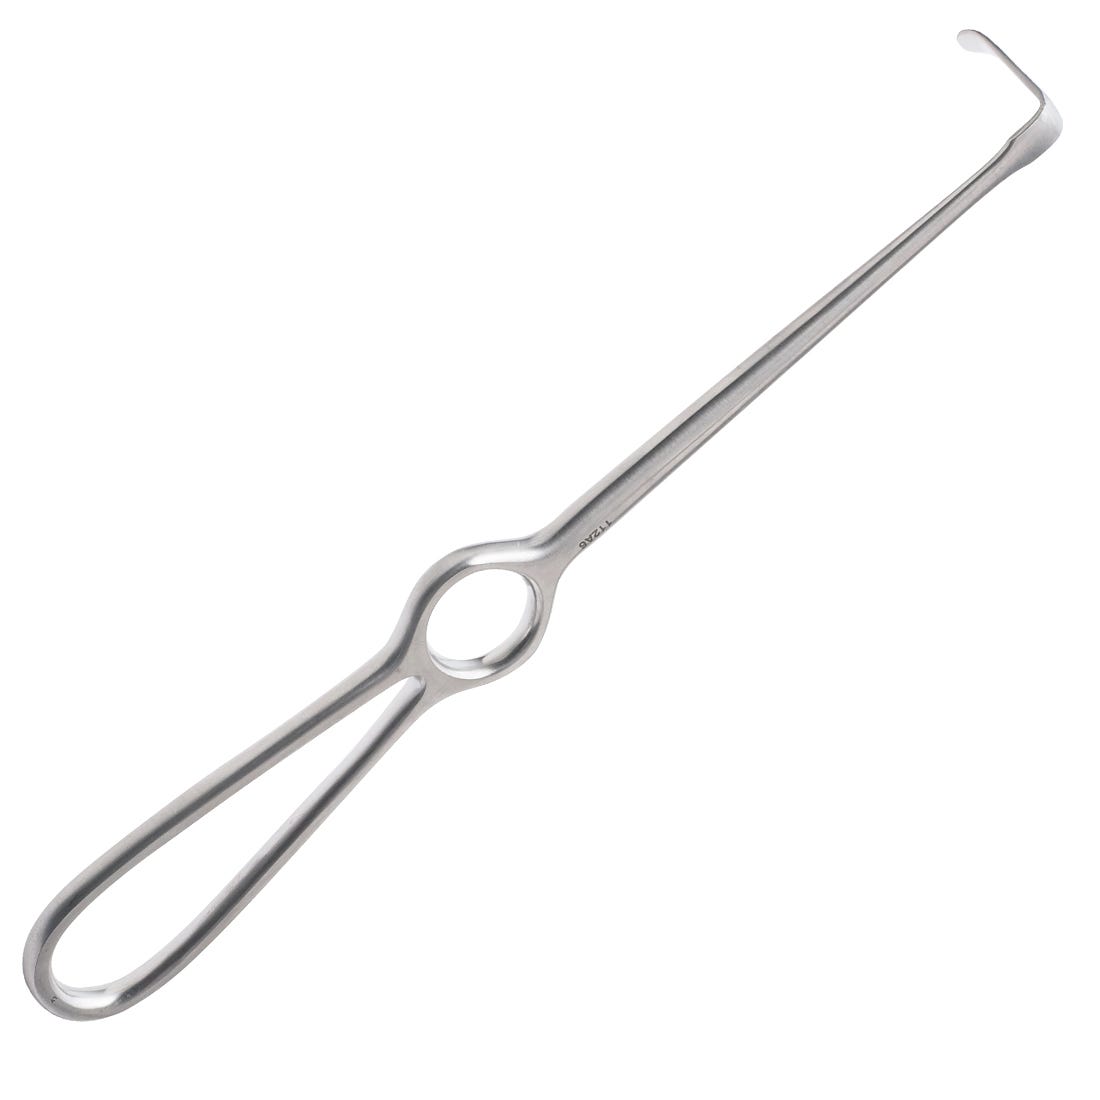 Obwegeser Type Surgical Retractor Standard, Curved Down, 7mm x 25mm